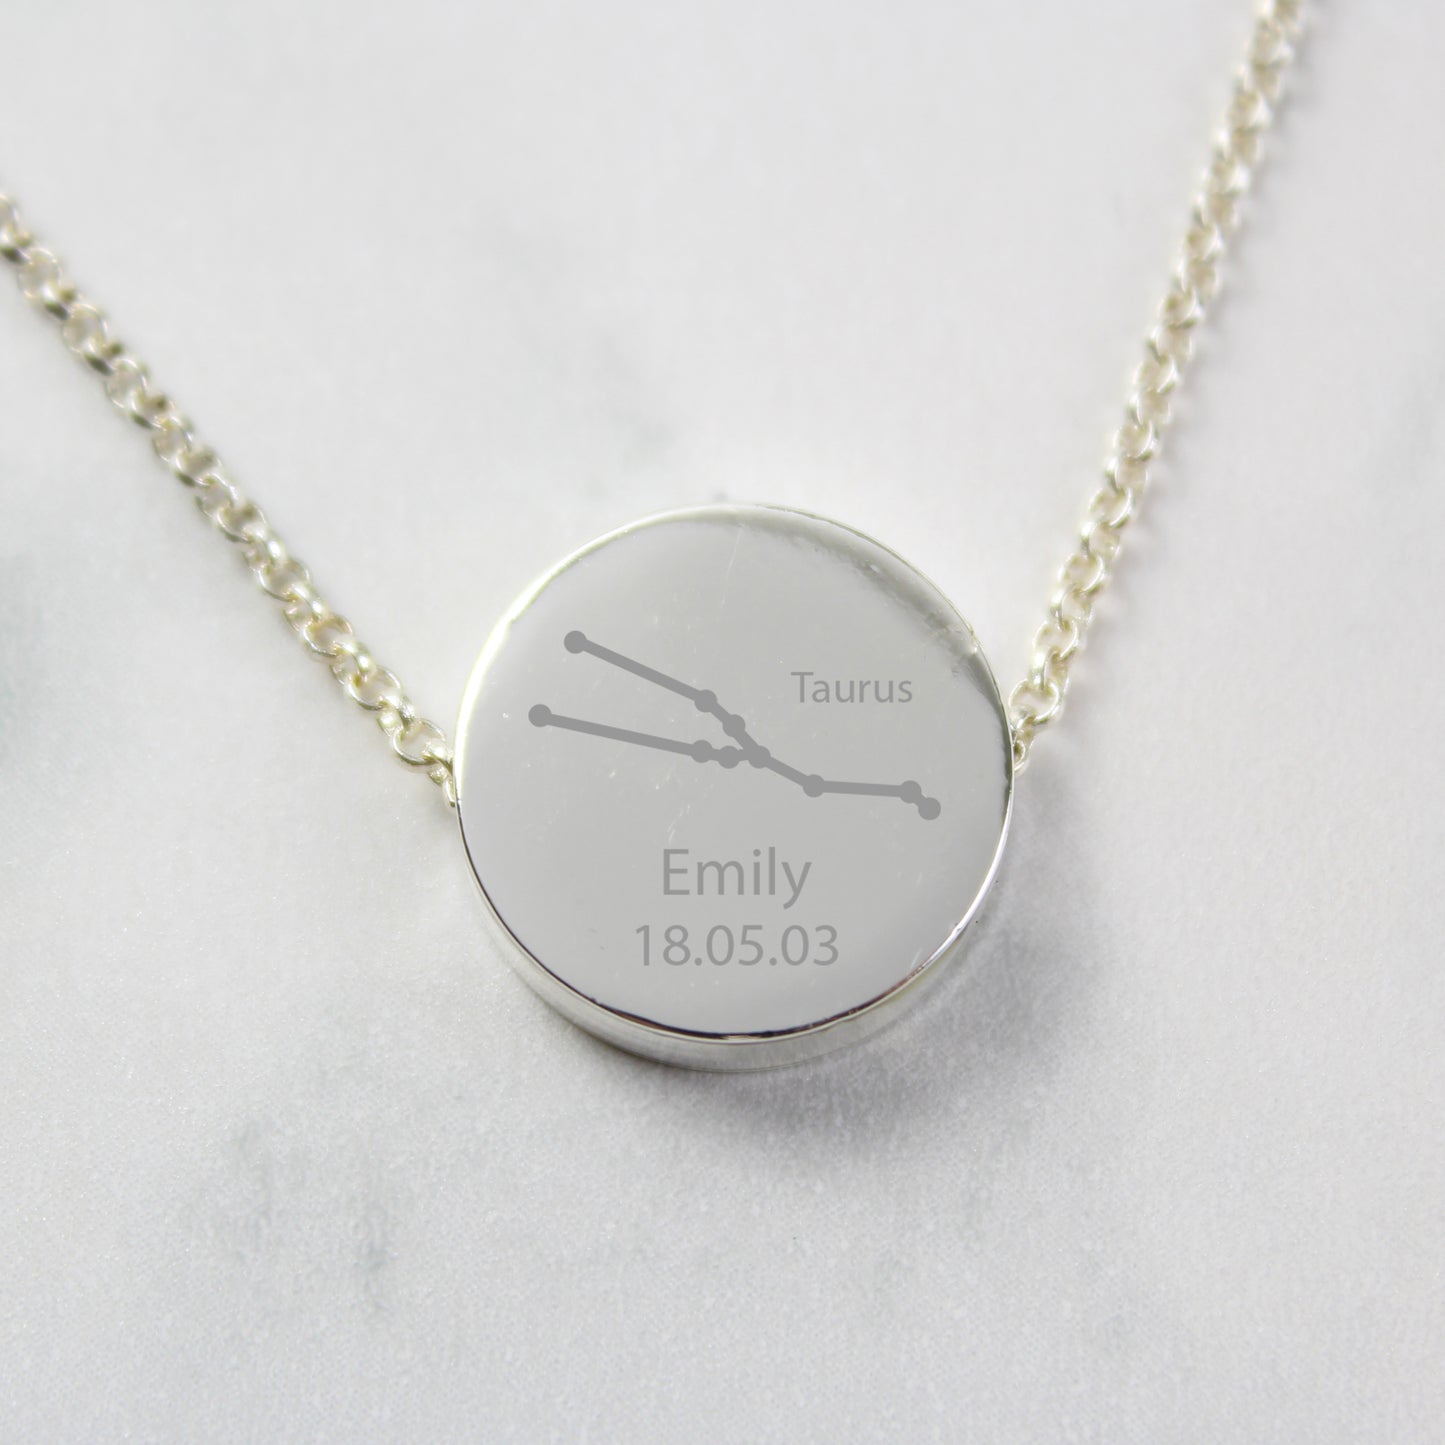 Personalised Taurus Zodiac Star Sign  Silver Tone Necklace (April 20th - May 20th) - Personalise It!